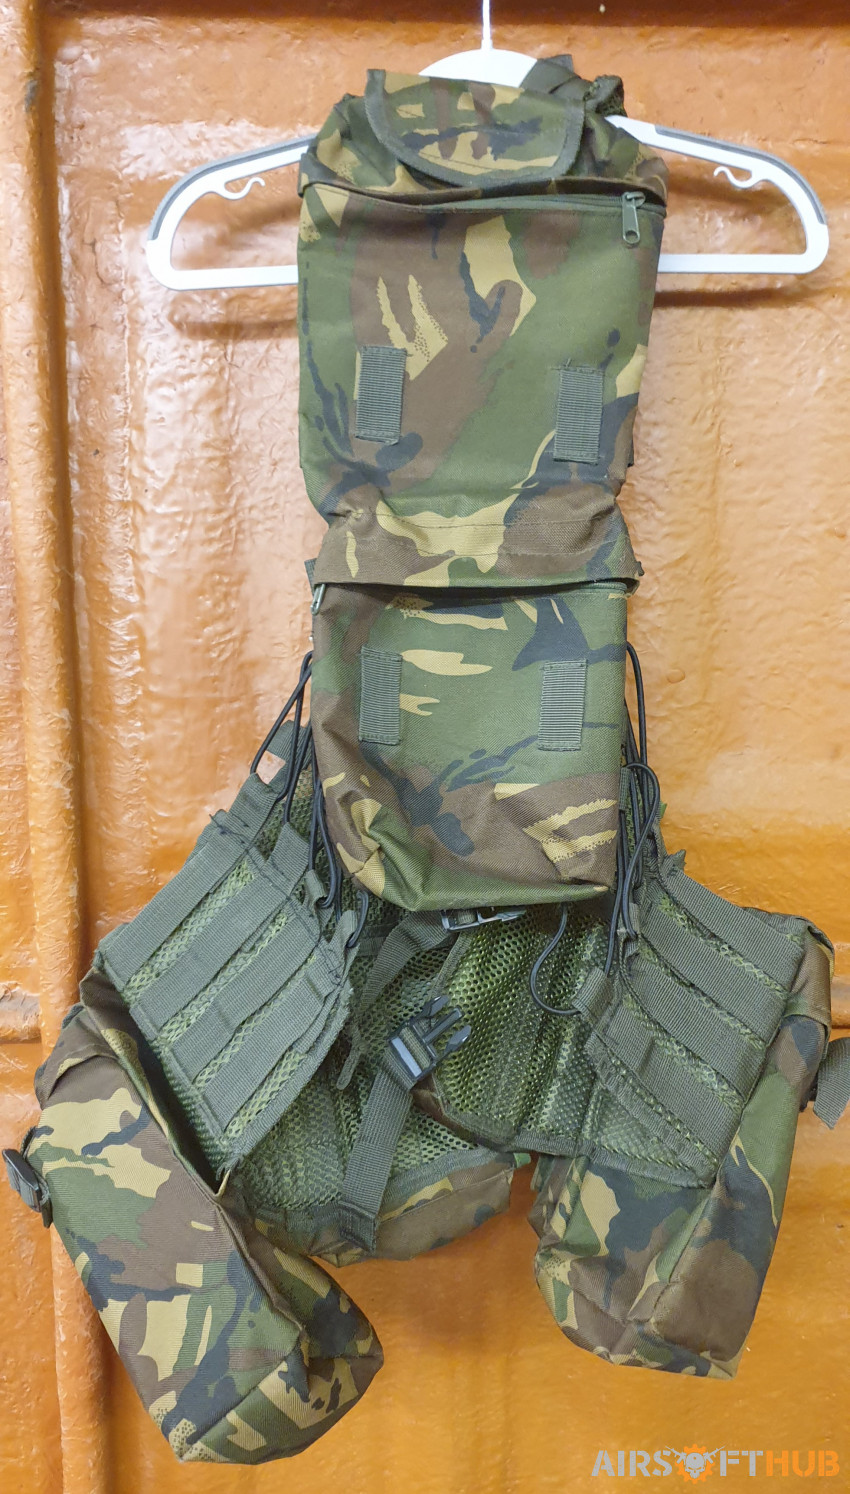 The Green Gear Set - Used airsoft equipment